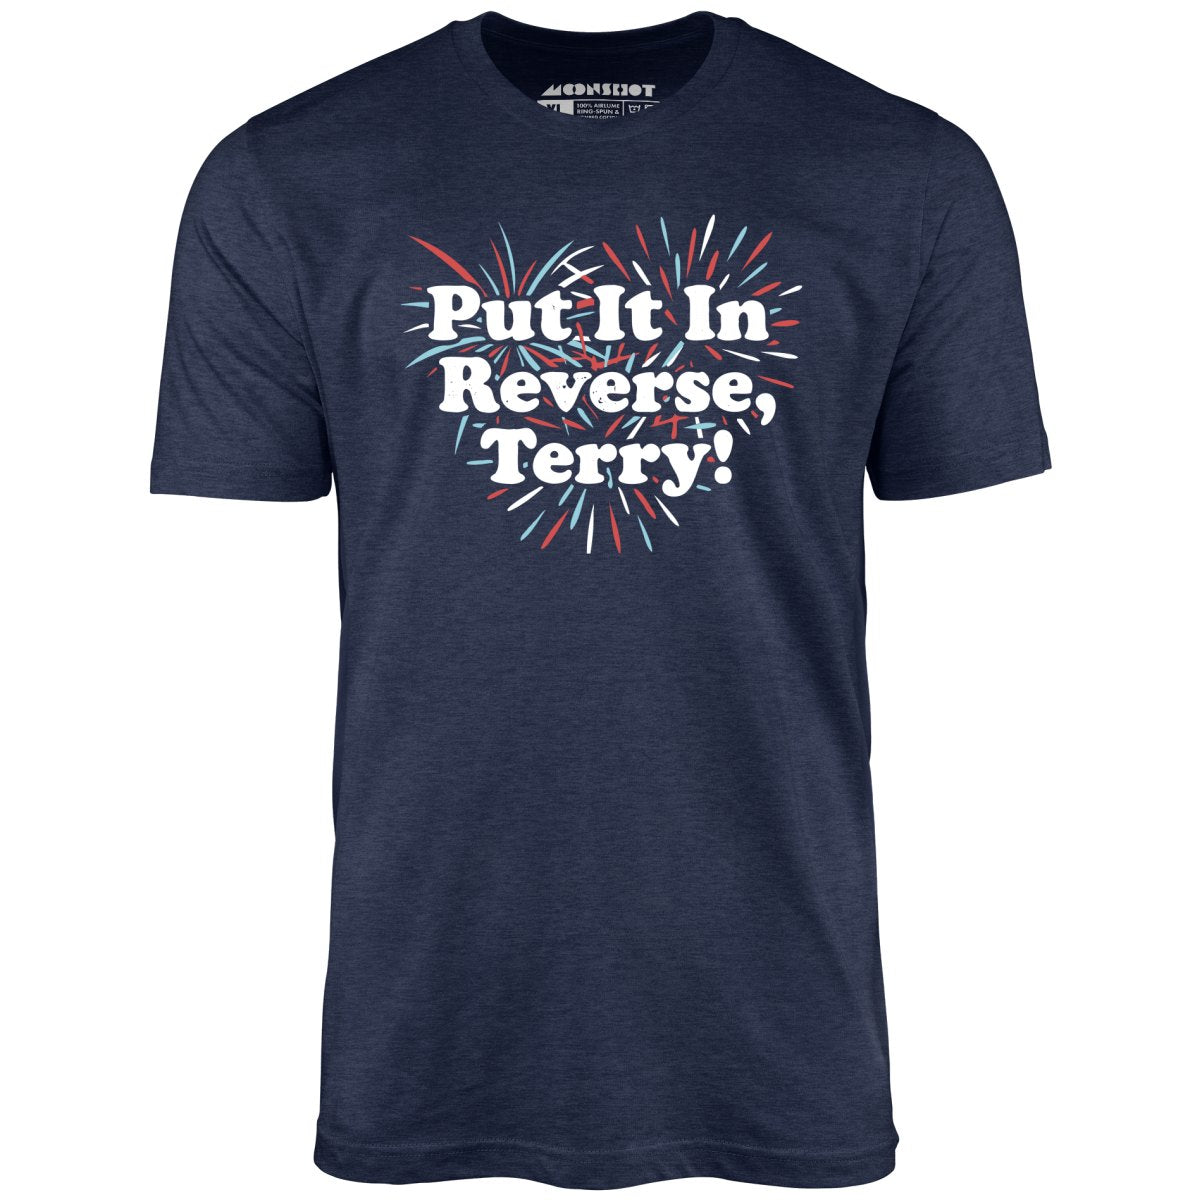 Put It In Reverse, Terry! - Unisex T-Shirt